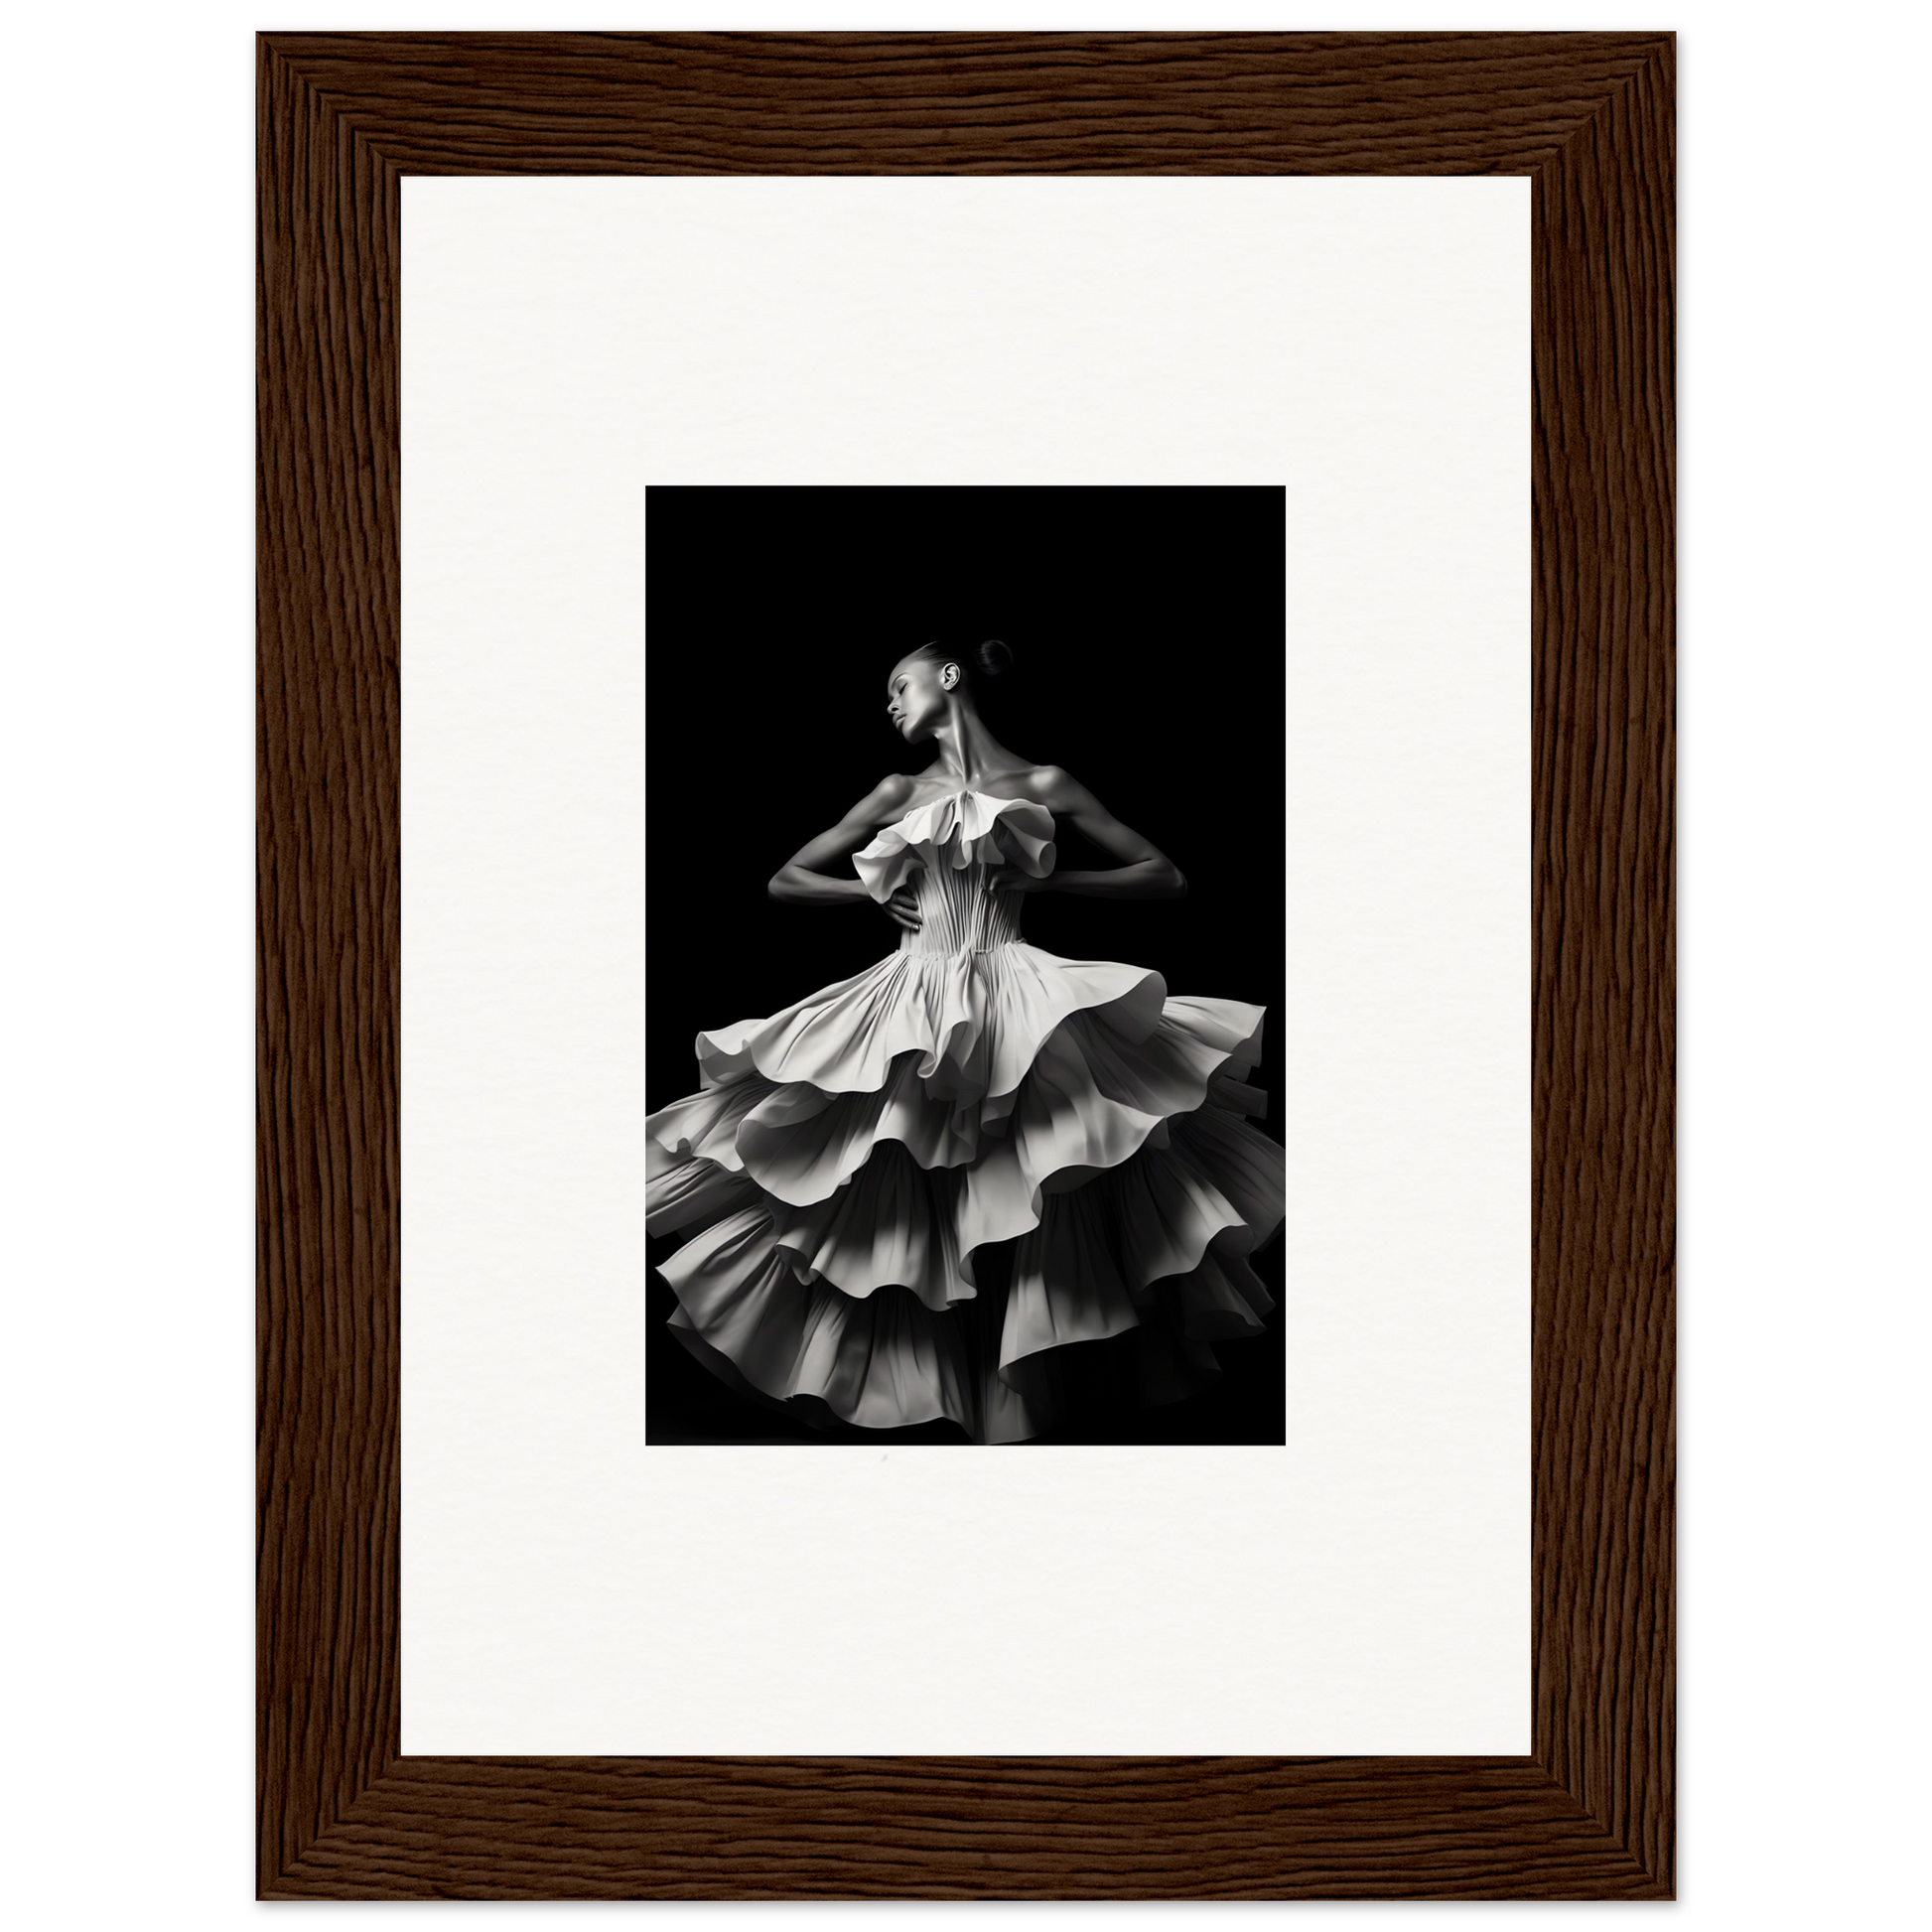 Dancers and time a2 - framed poster - 13x18 cm / 5x7″ / dark